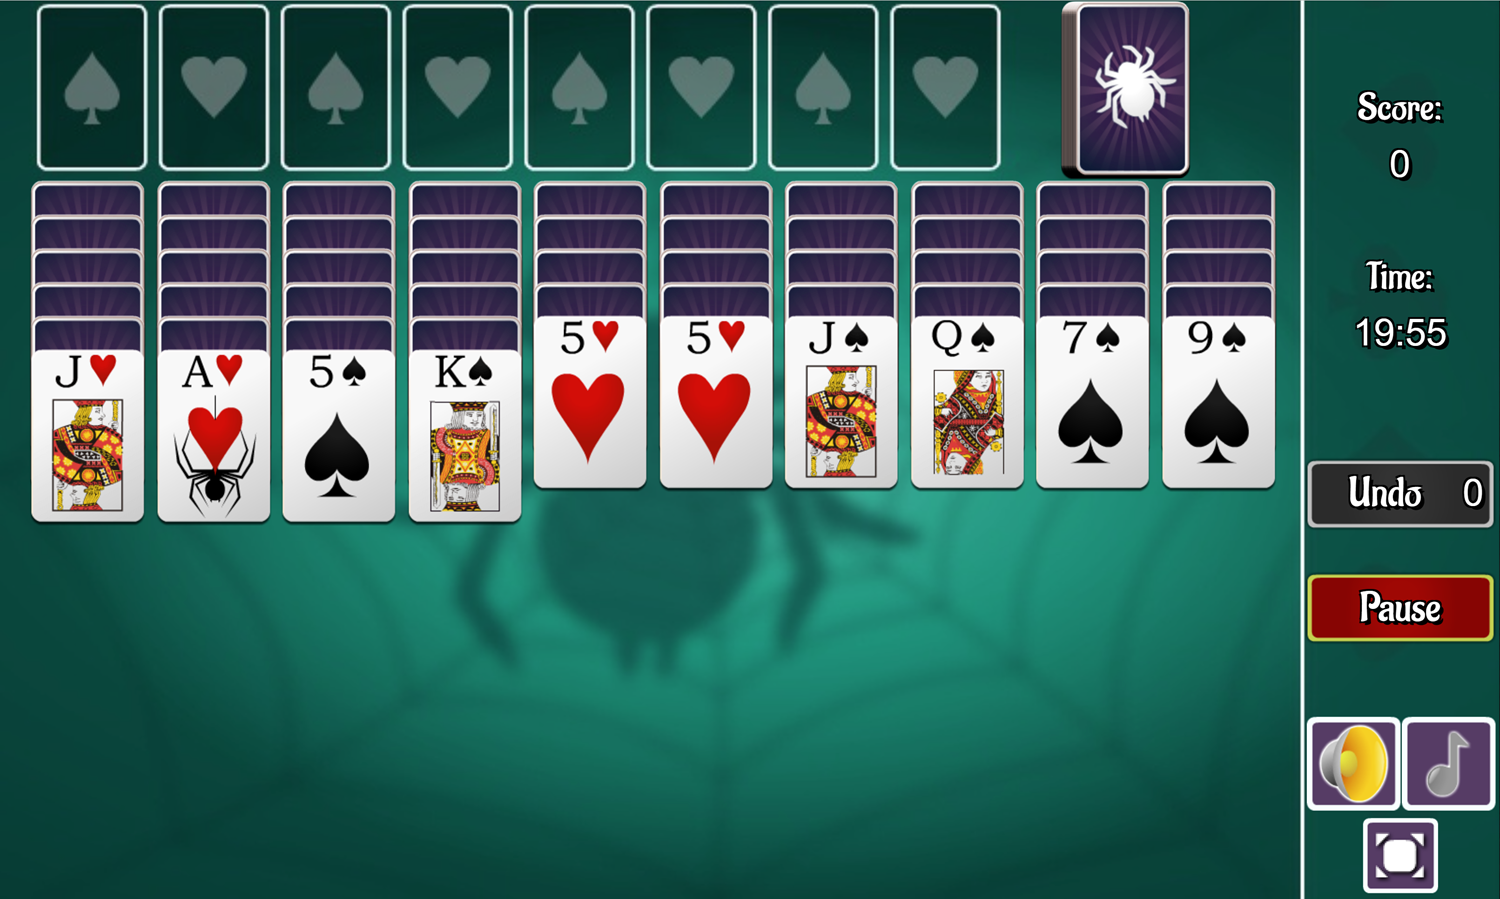 2 Suits Spider Solitaire Game Deal Screenshot.